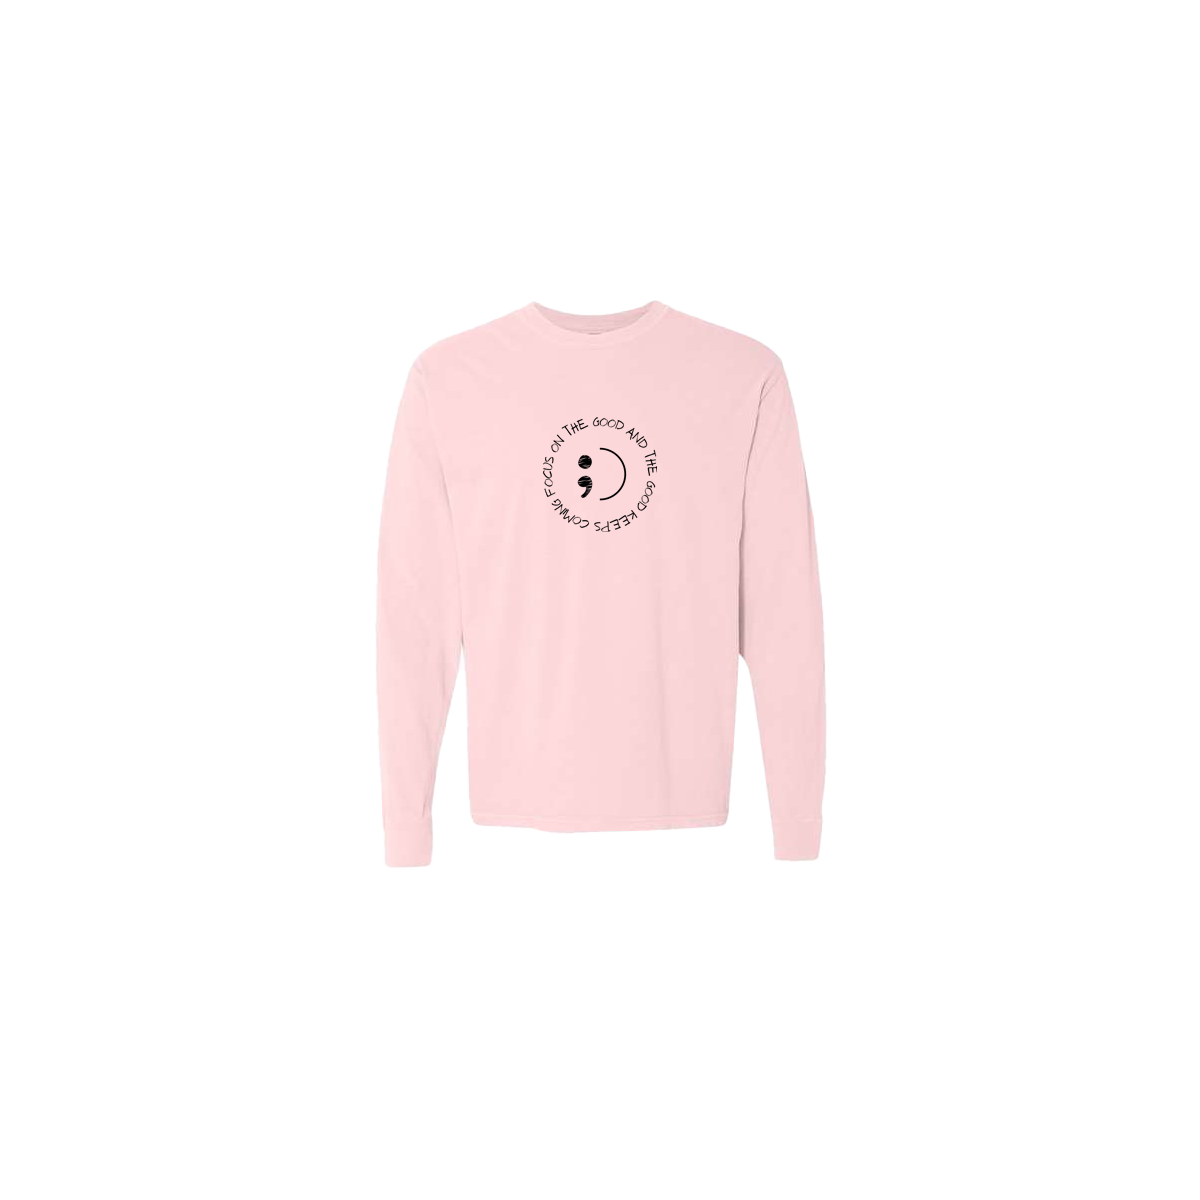 Focus on The Good And The Good Keeps Coming Embroidered Pink Long Sleeve Tshirt - Mental Health Awareness Clothing